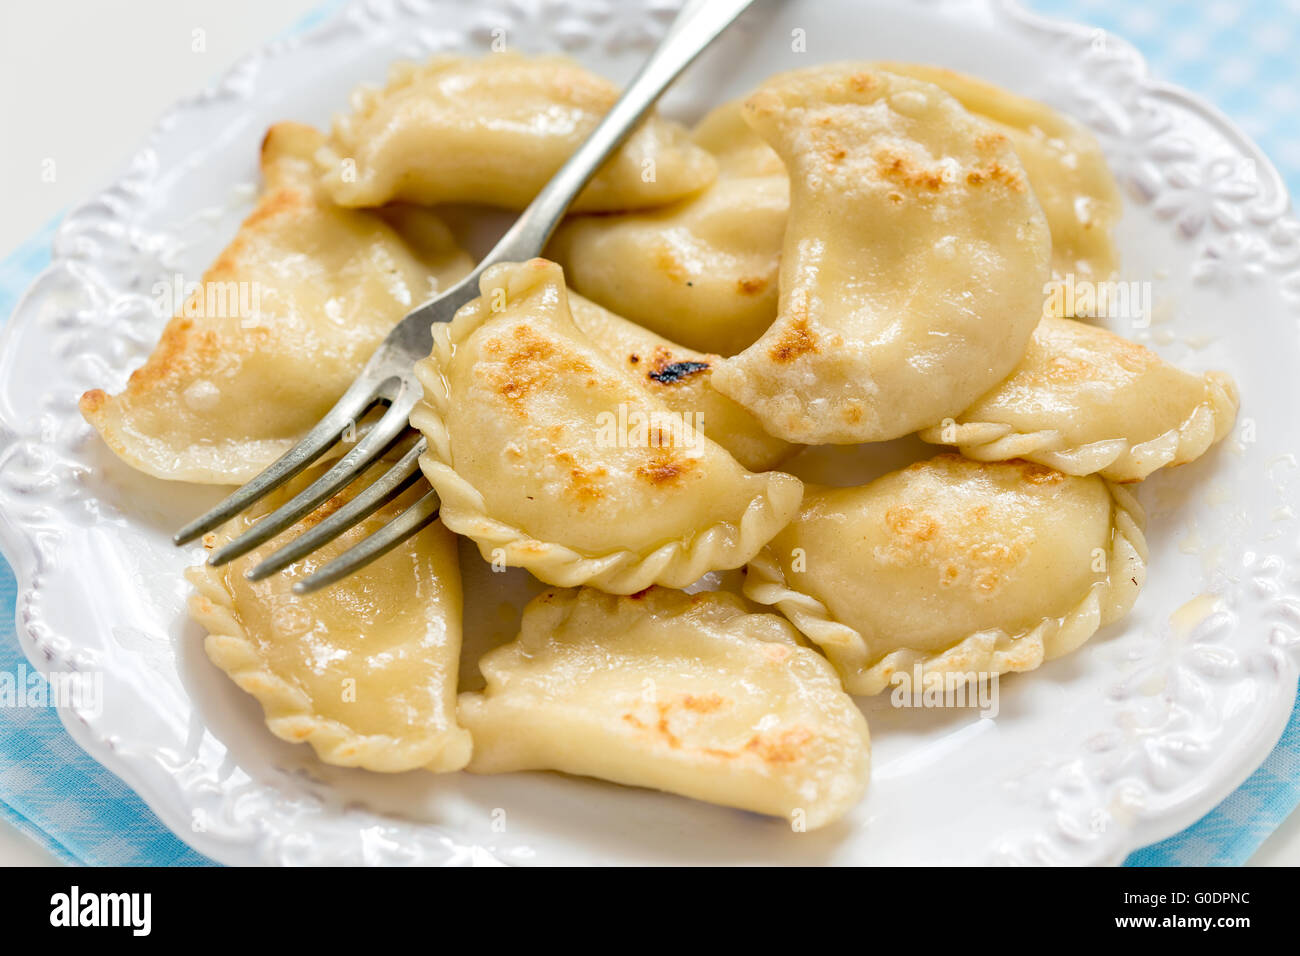 Fried in butter dumplings with cottage cheese. Stock Photo